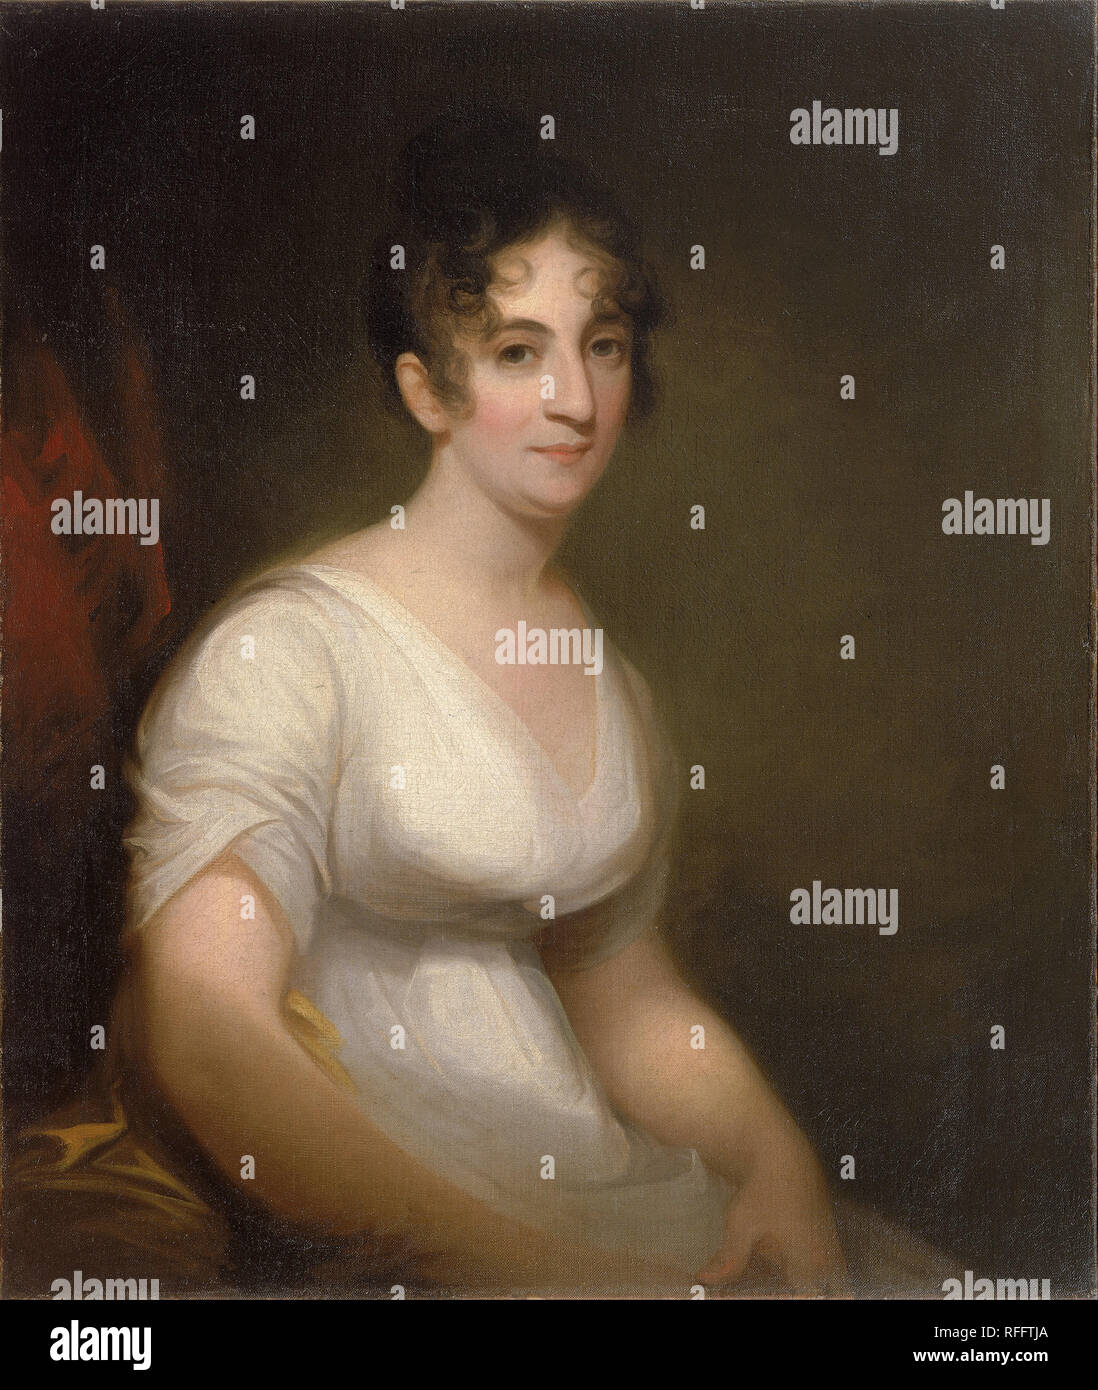 Sally Etting. Date/Period: 1808. Painting. Oil on canvas Oil on canvas. Height: 762 mm (30 in); Width: 635 mm (25 in). Author: Thomas Sully. SULLY, THOMAS. Stock Photo